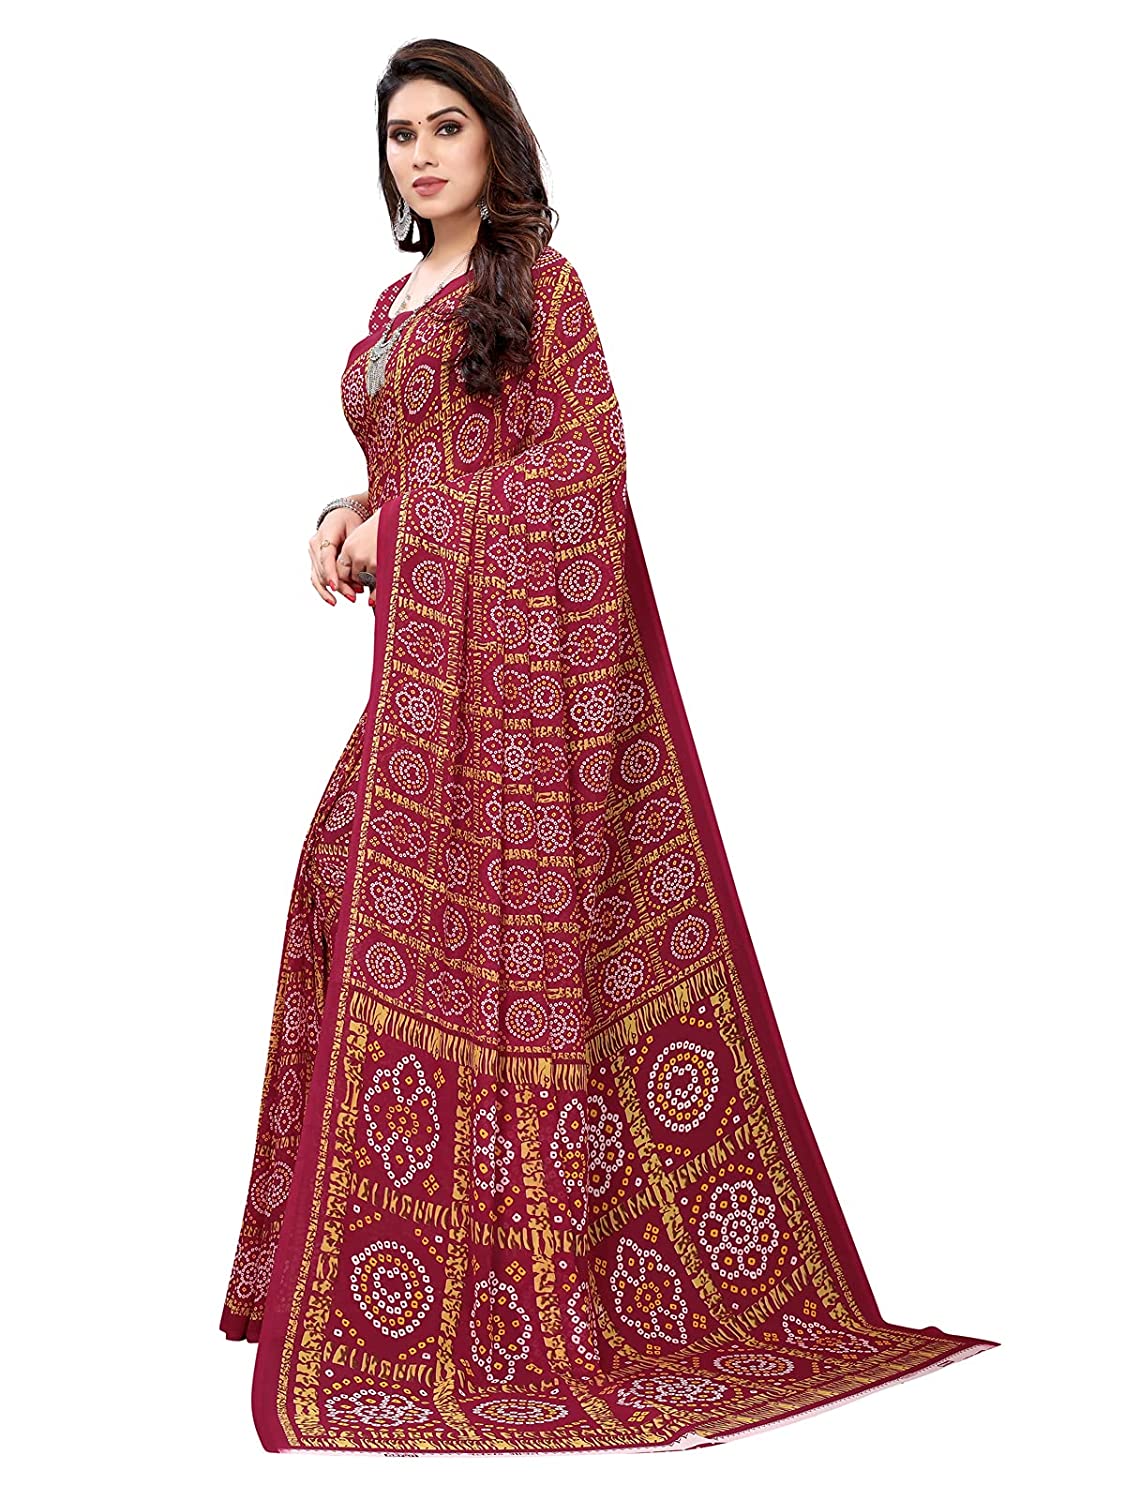 Women's Bandhani Printed Georgette Saree with Unstitched Blouse Piece